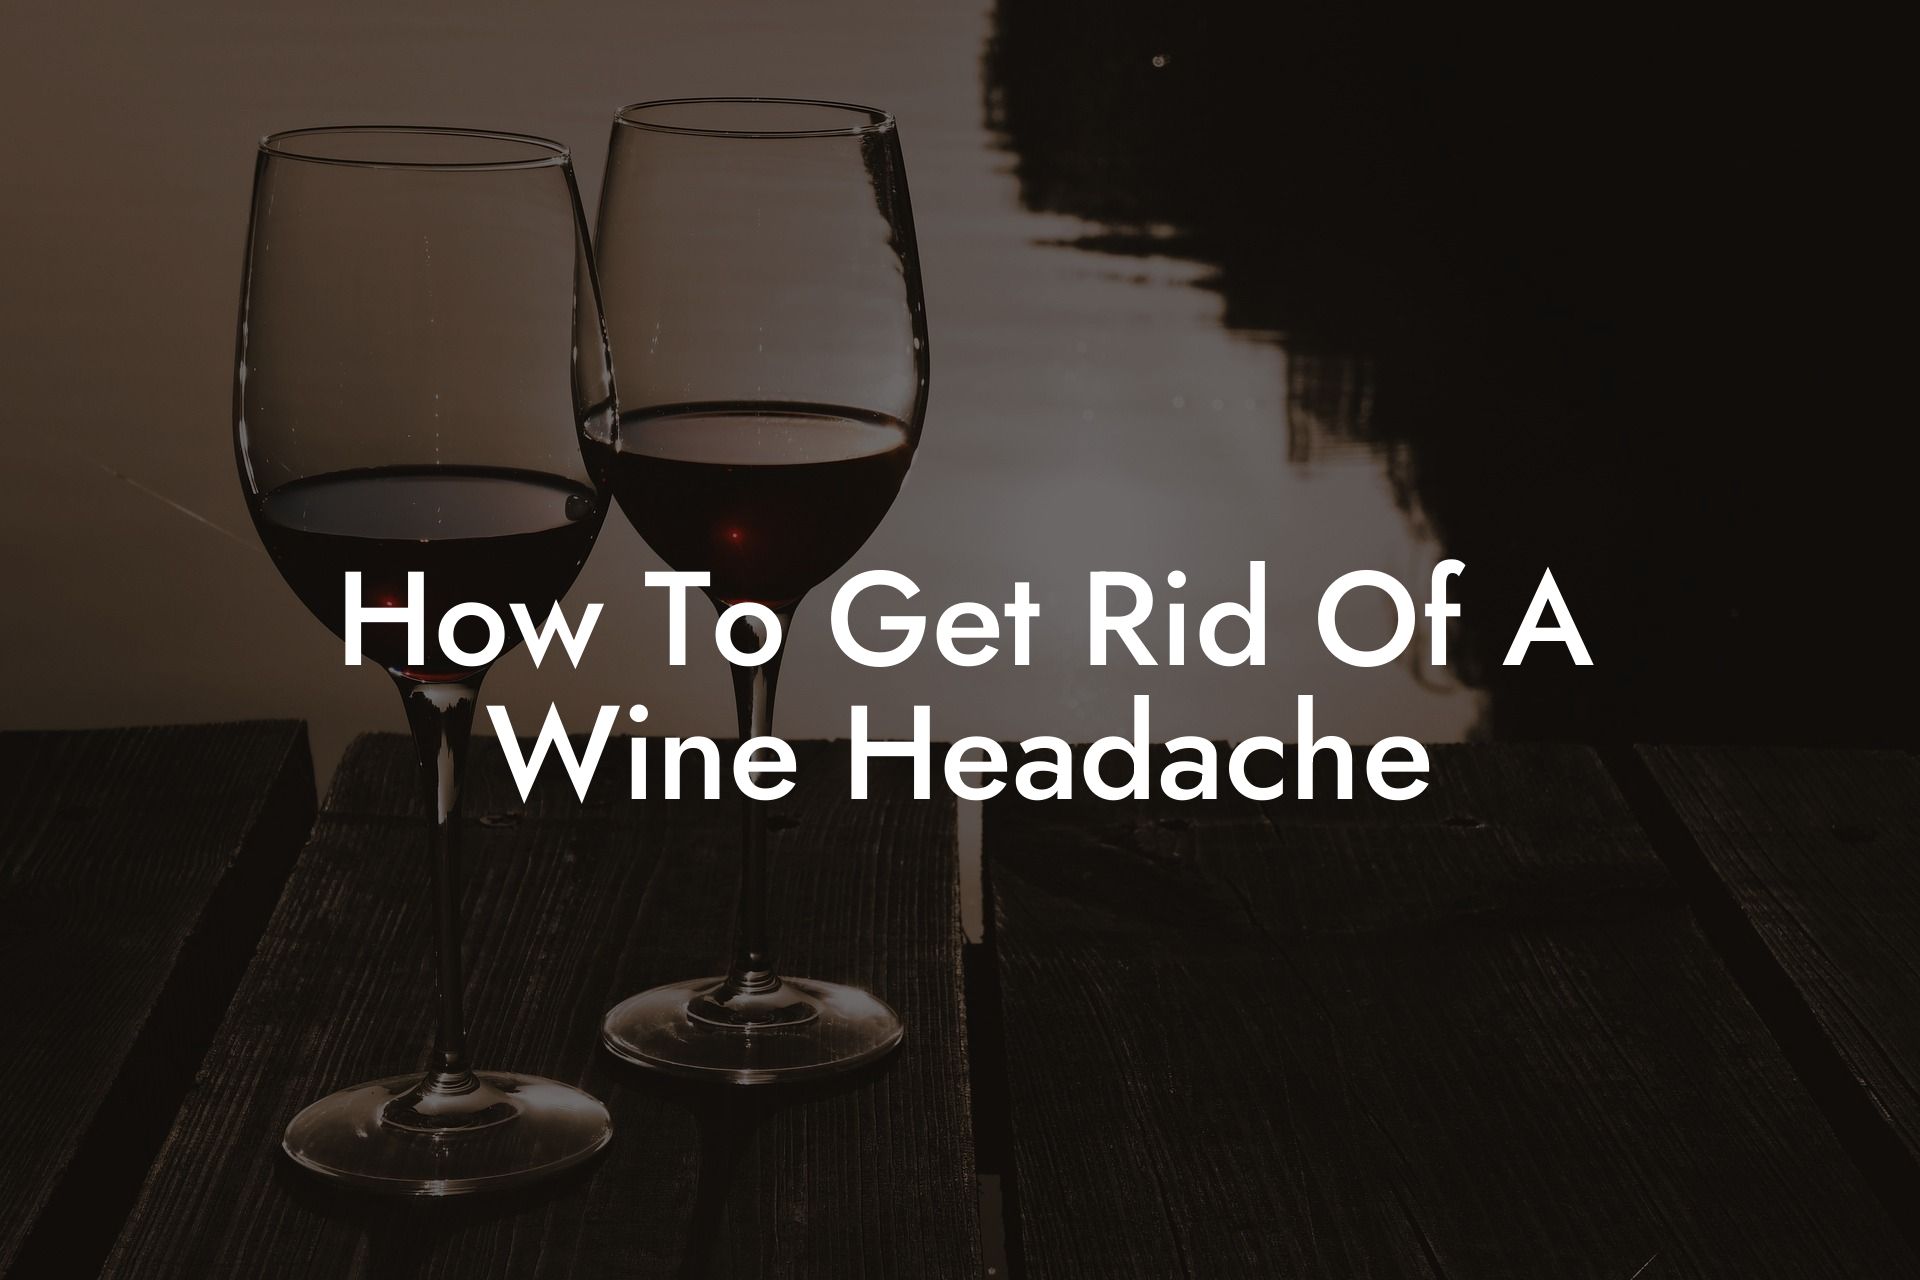 How To Get Rid Of A Wine Headache